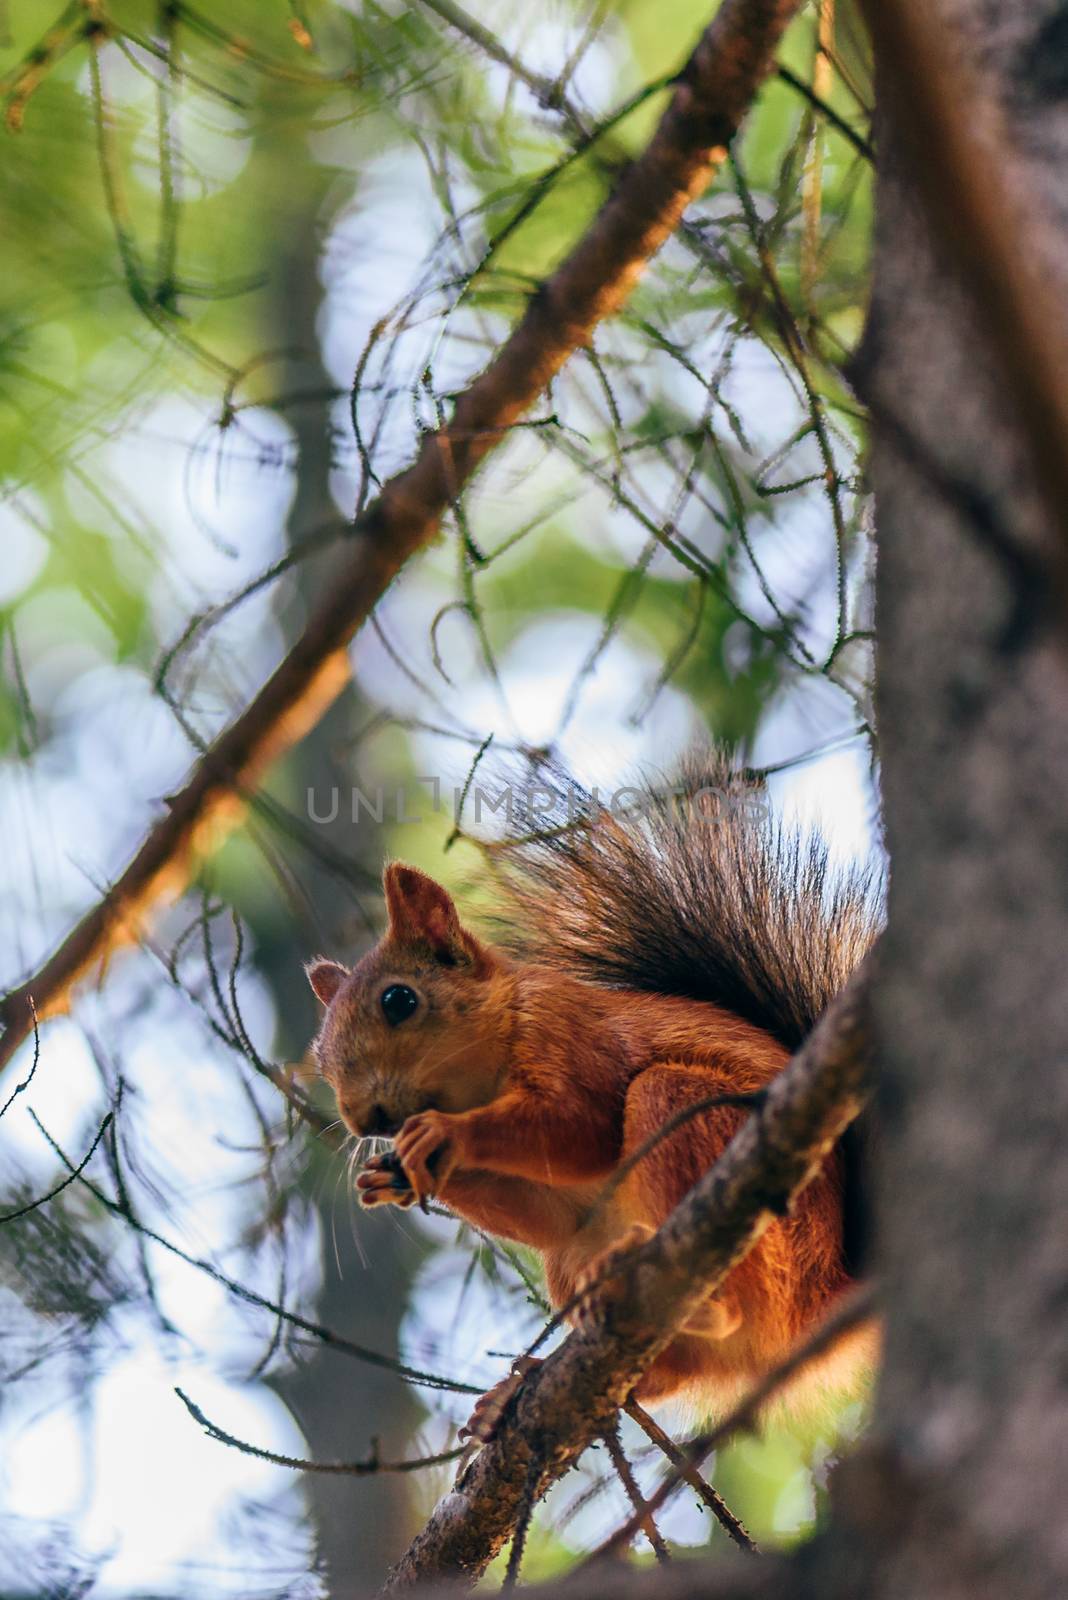 Squirrel eats nuts and sits on branch. by Seva_blsv